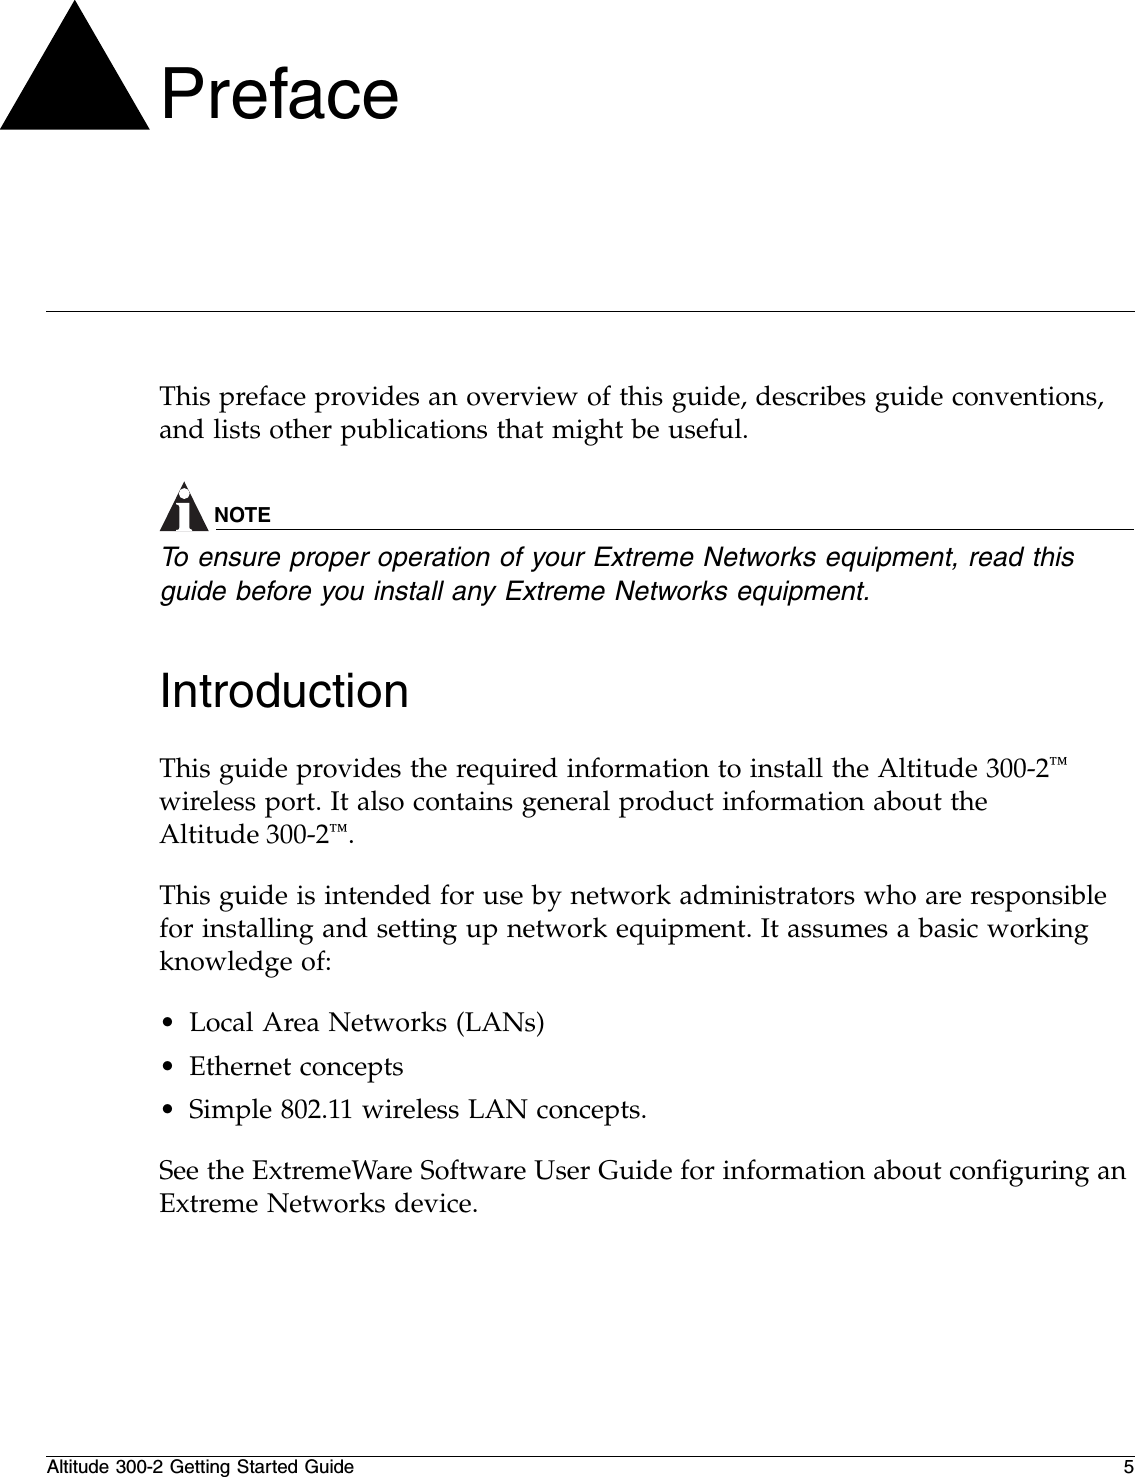 Altitude 300-2 Getting Started Guide 5PrefaceThis preface provides an overview of this guide, describes guide conventions, and lists other publications that might be useful.NOTETo ensure proper operation of your Extreme Networks equipment, read this guide before you install any Extreme Networks equipment.IntroductionThis guide provides the required information to install the Altitude 300-2™ wireless port. It also contains general product information about the Altitude 300-2™.This guide is intended for use by network administrators who are responsible for installing and setting up network equipment. It assumes a basic working knowledge of:•Local Area Networks (LANs)•Ethernet concepts•Simple 802.11 wireless LAN concepts.See the ExtremeWare Software User Guide for information about configuring an Extreme Networks device.